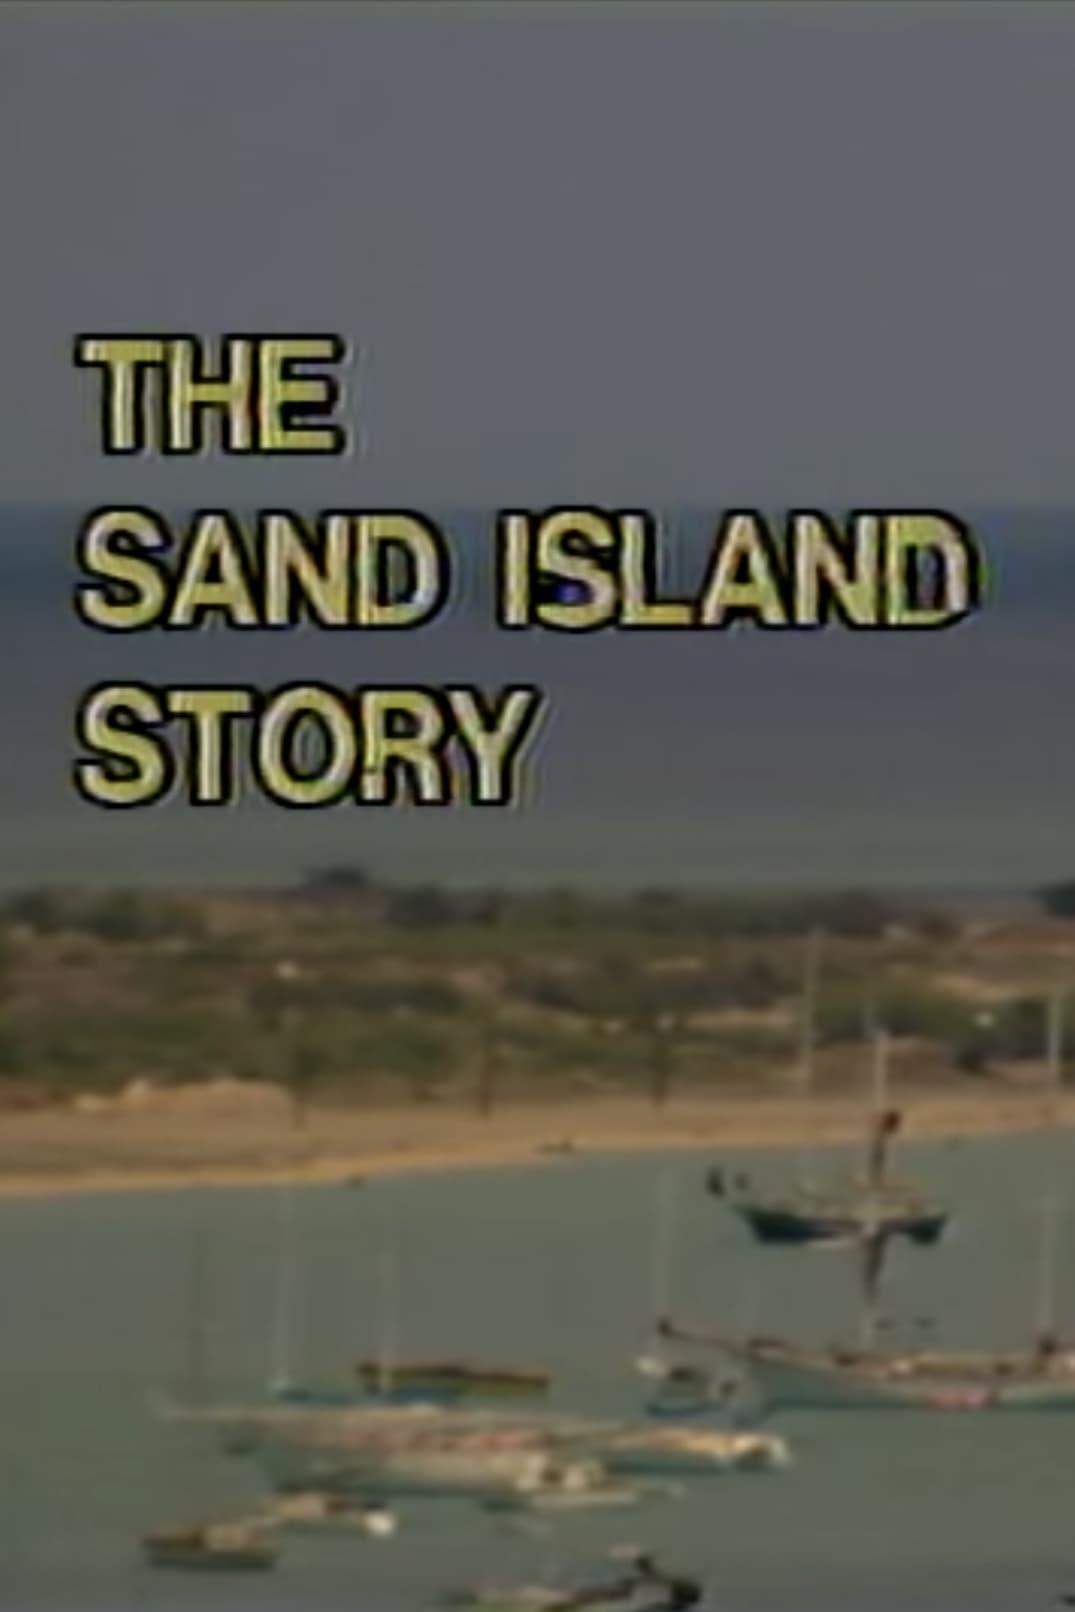 The Sand Island Story poster